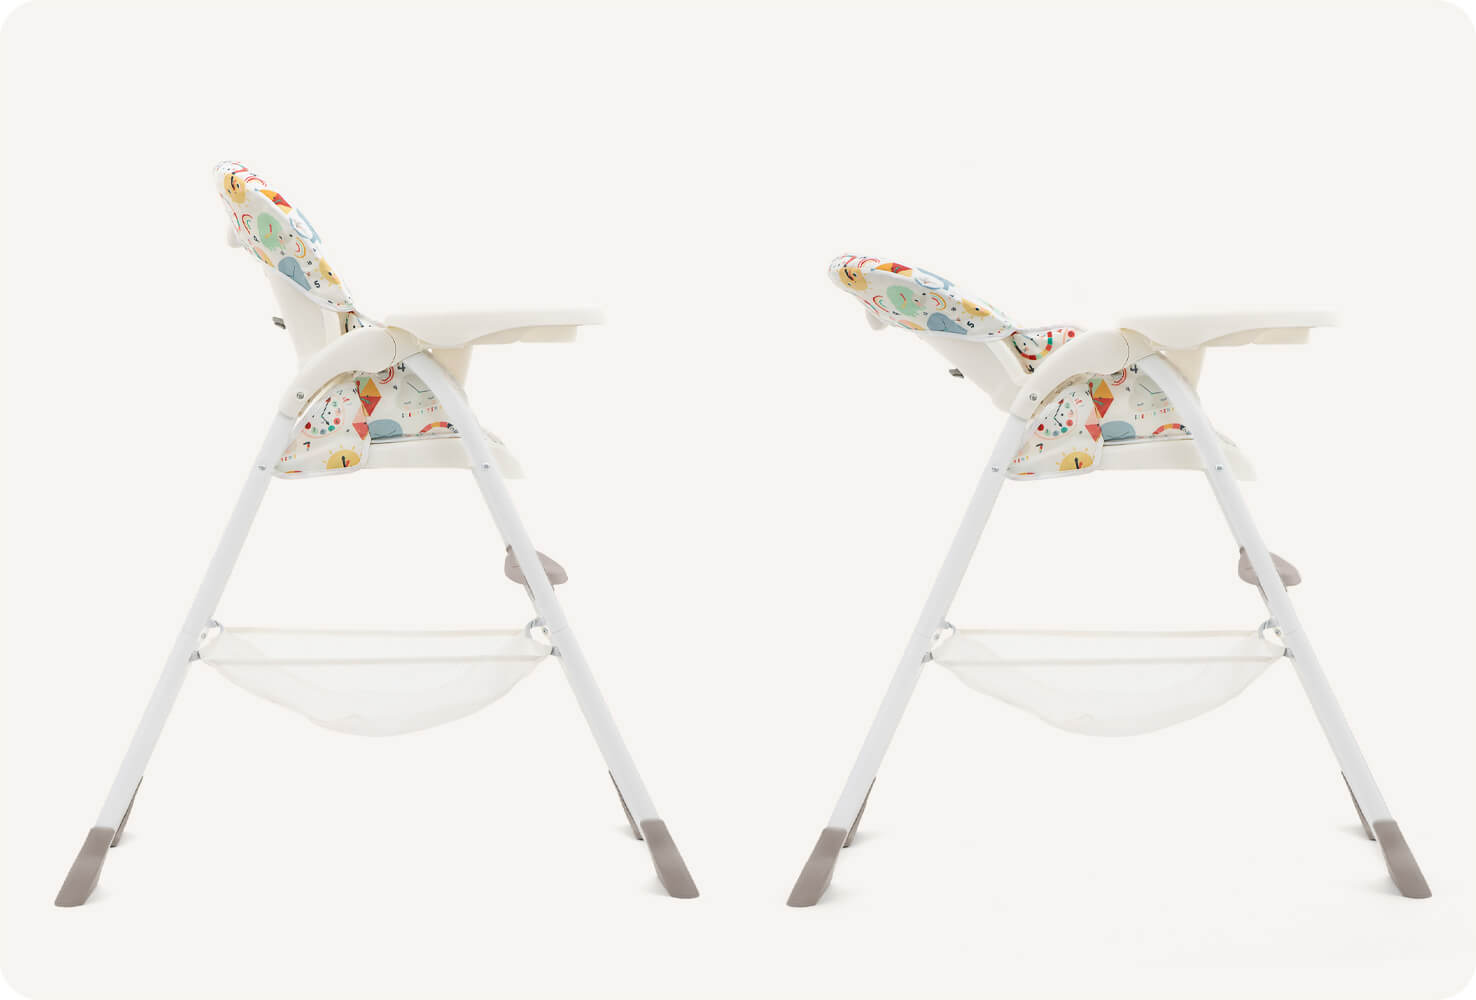  Two Joie highchairs in a multi-color print featuring cartoon clock faces, animals, and geometric shapes from a side view. One is upright and one is reclined to indicate the reclining function of the mimzy Snacker.